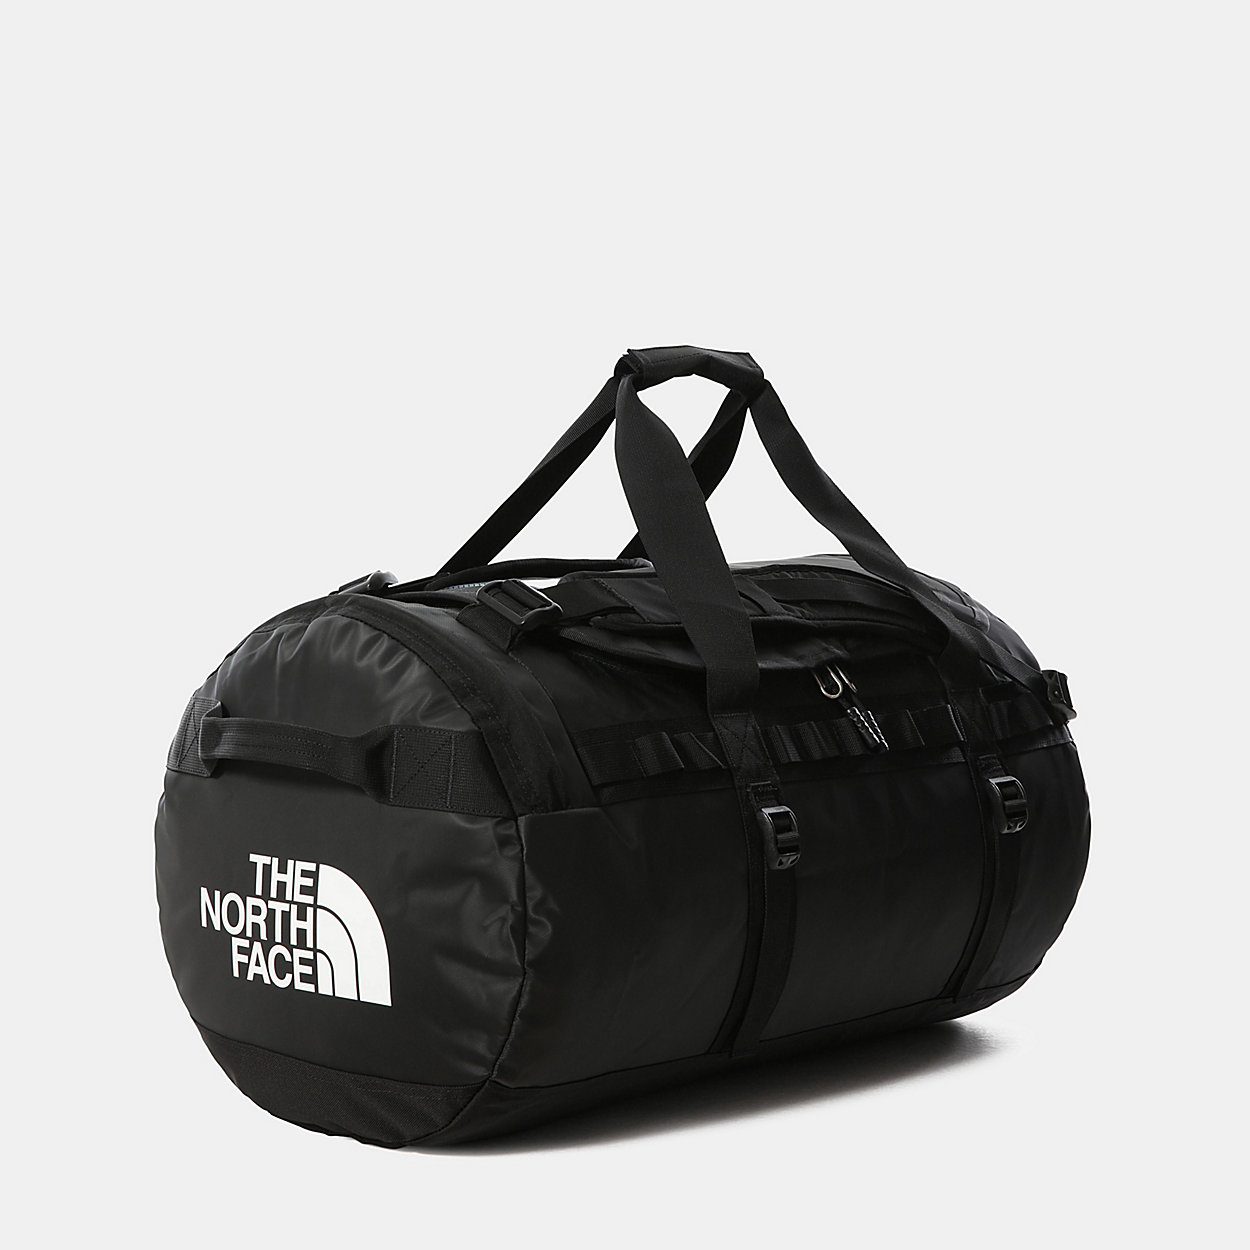 Unlock Wilderness' choice in the Mountain Equipment Vs North Face comparison, the Base Camp Duffel by The North Face